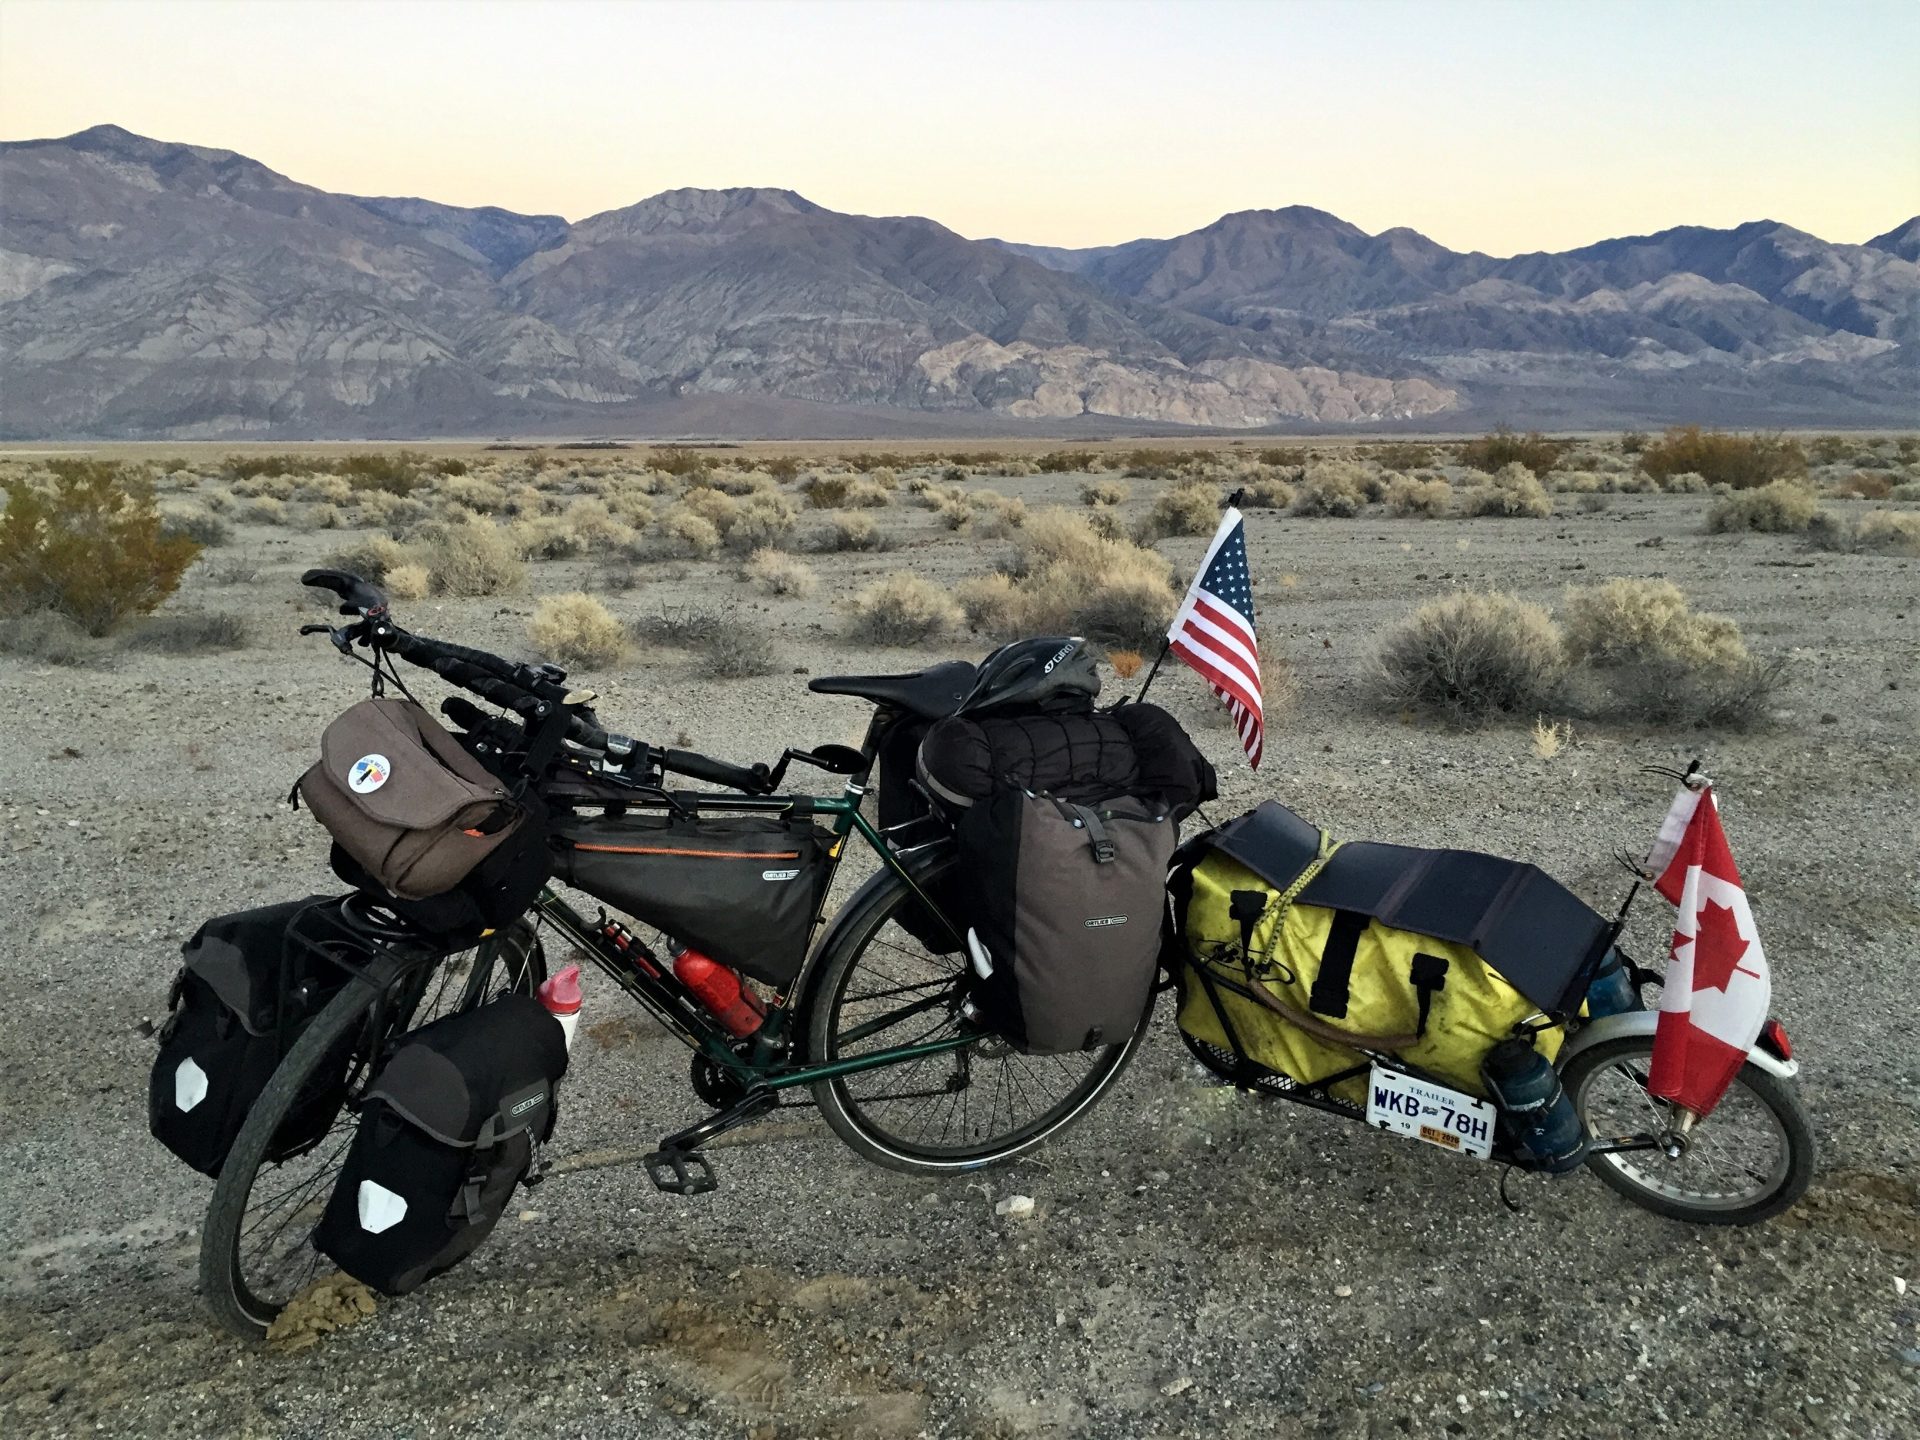 How to document your bike tour or adventure